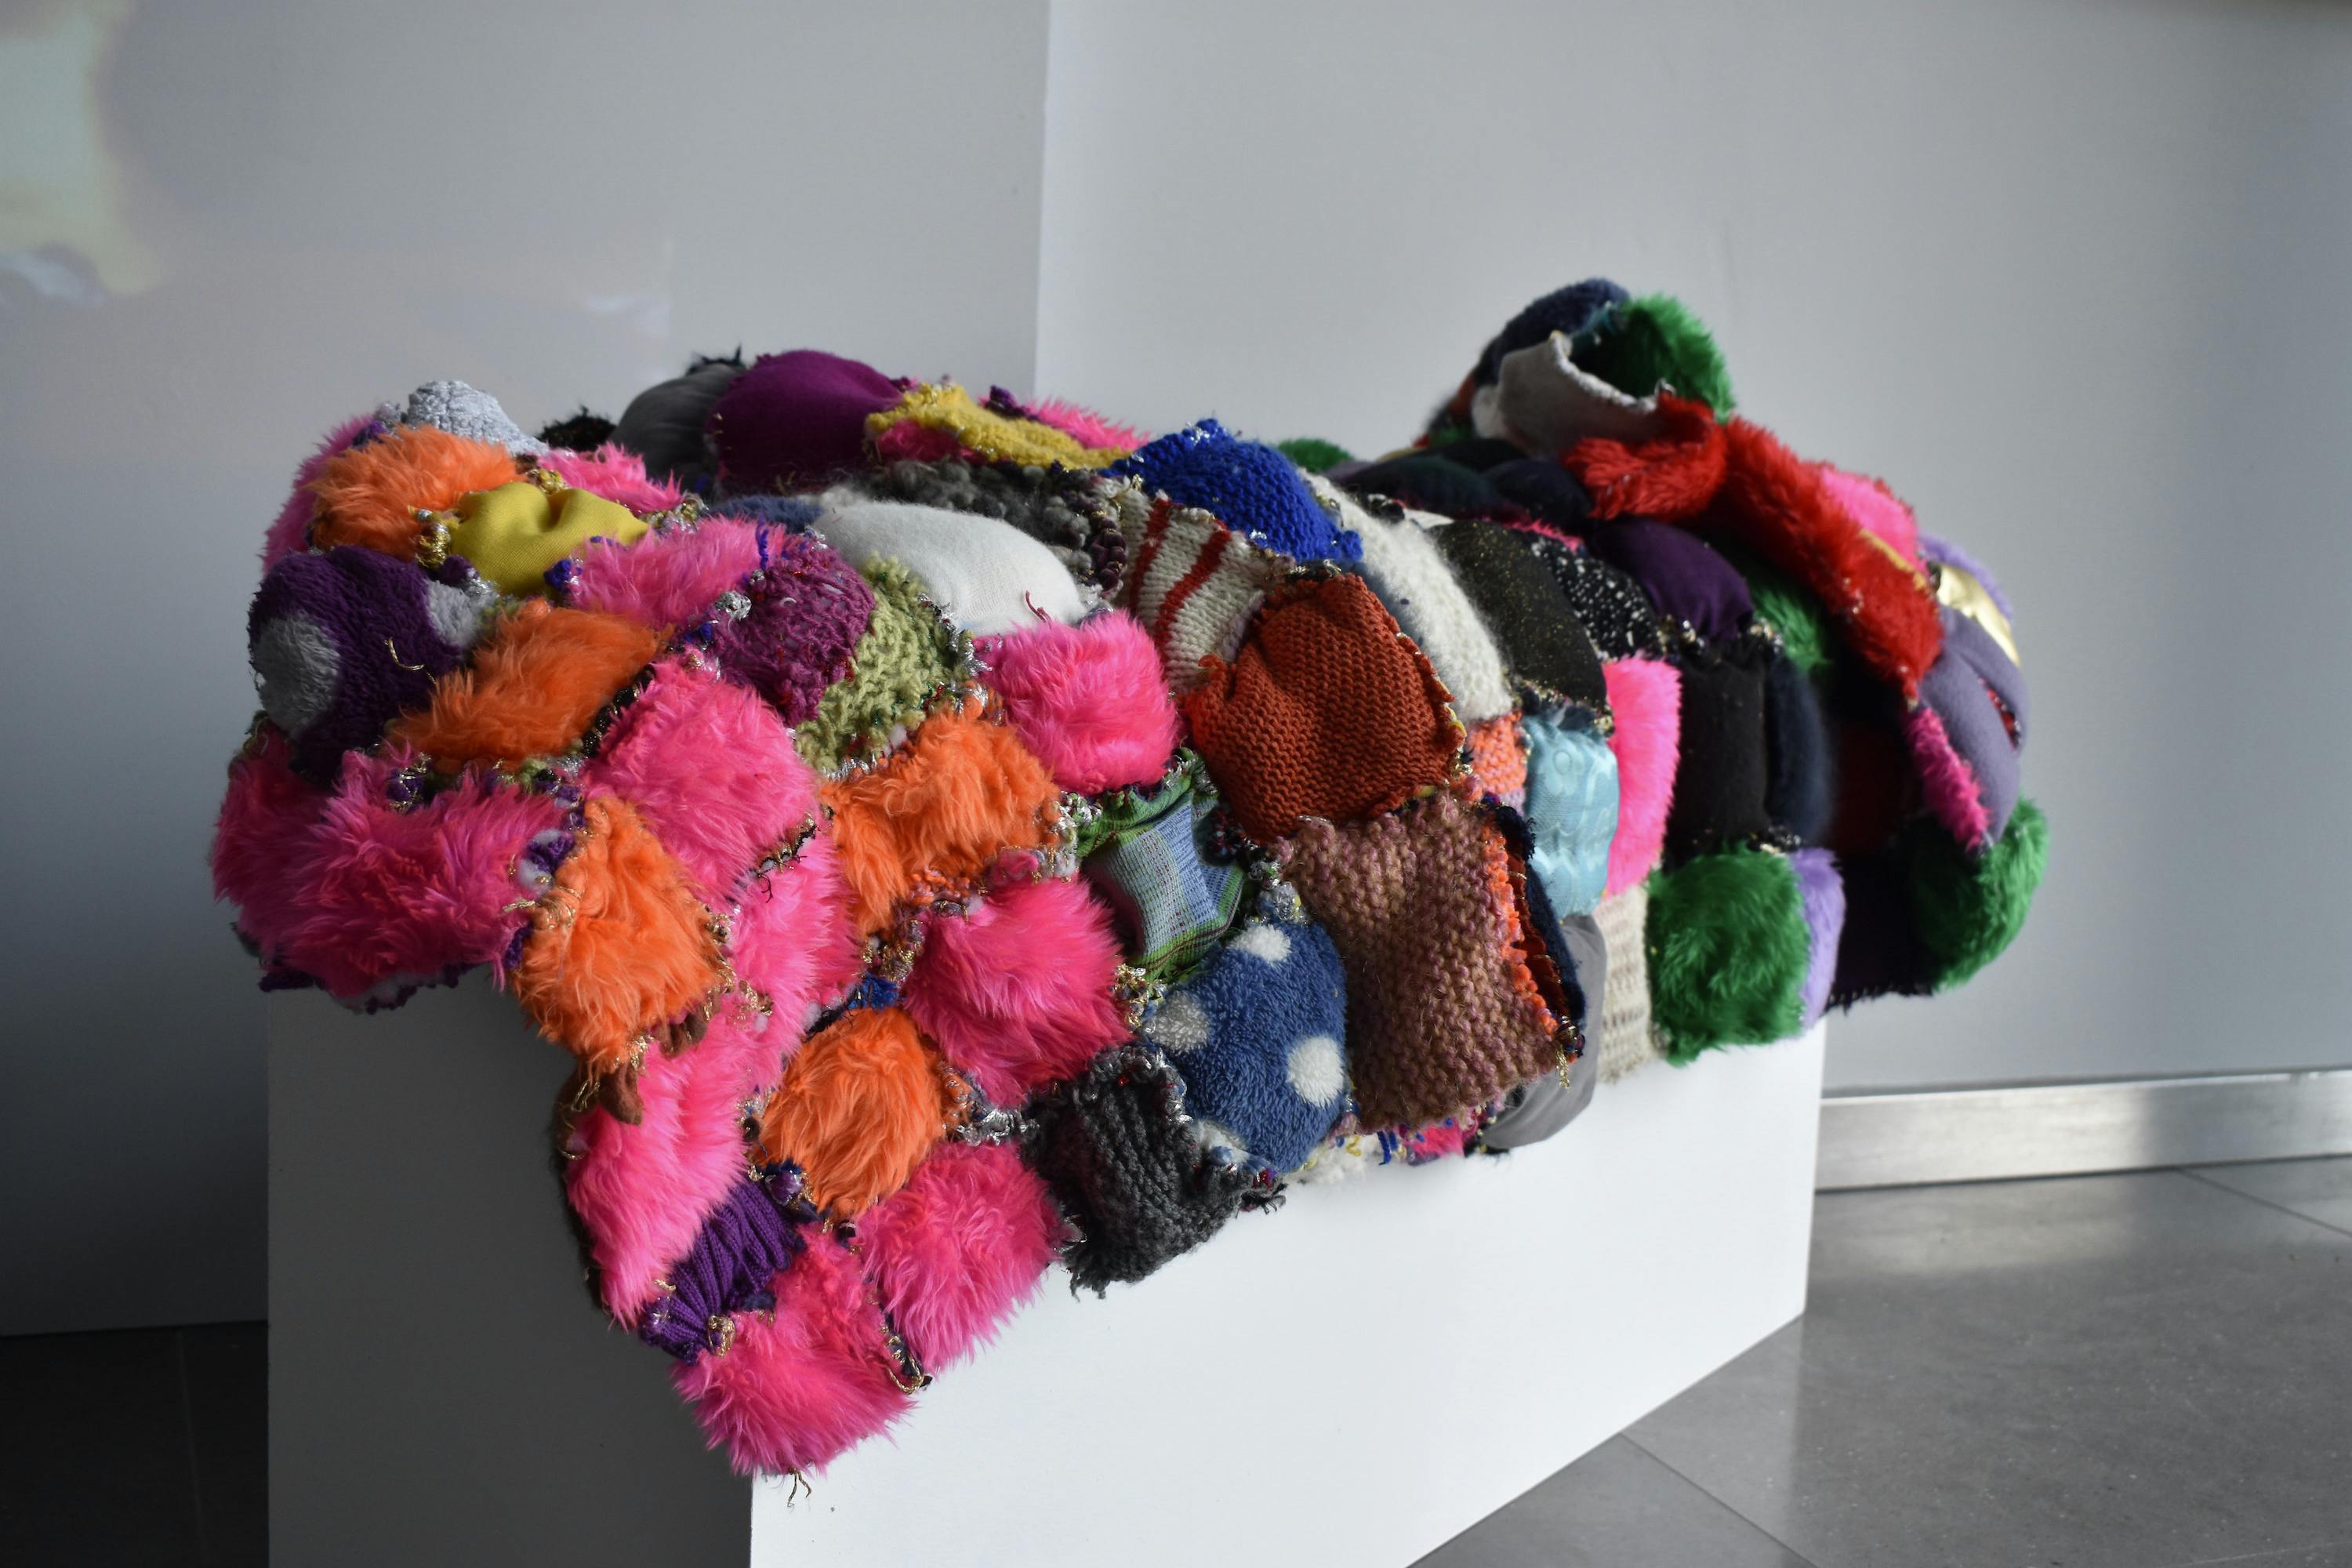 Lasmin Salmon. 'Cushion Quilt', Assembled Lines, Studio RCA, London. 2019. Image courtesy of the Artist and ActionSpace